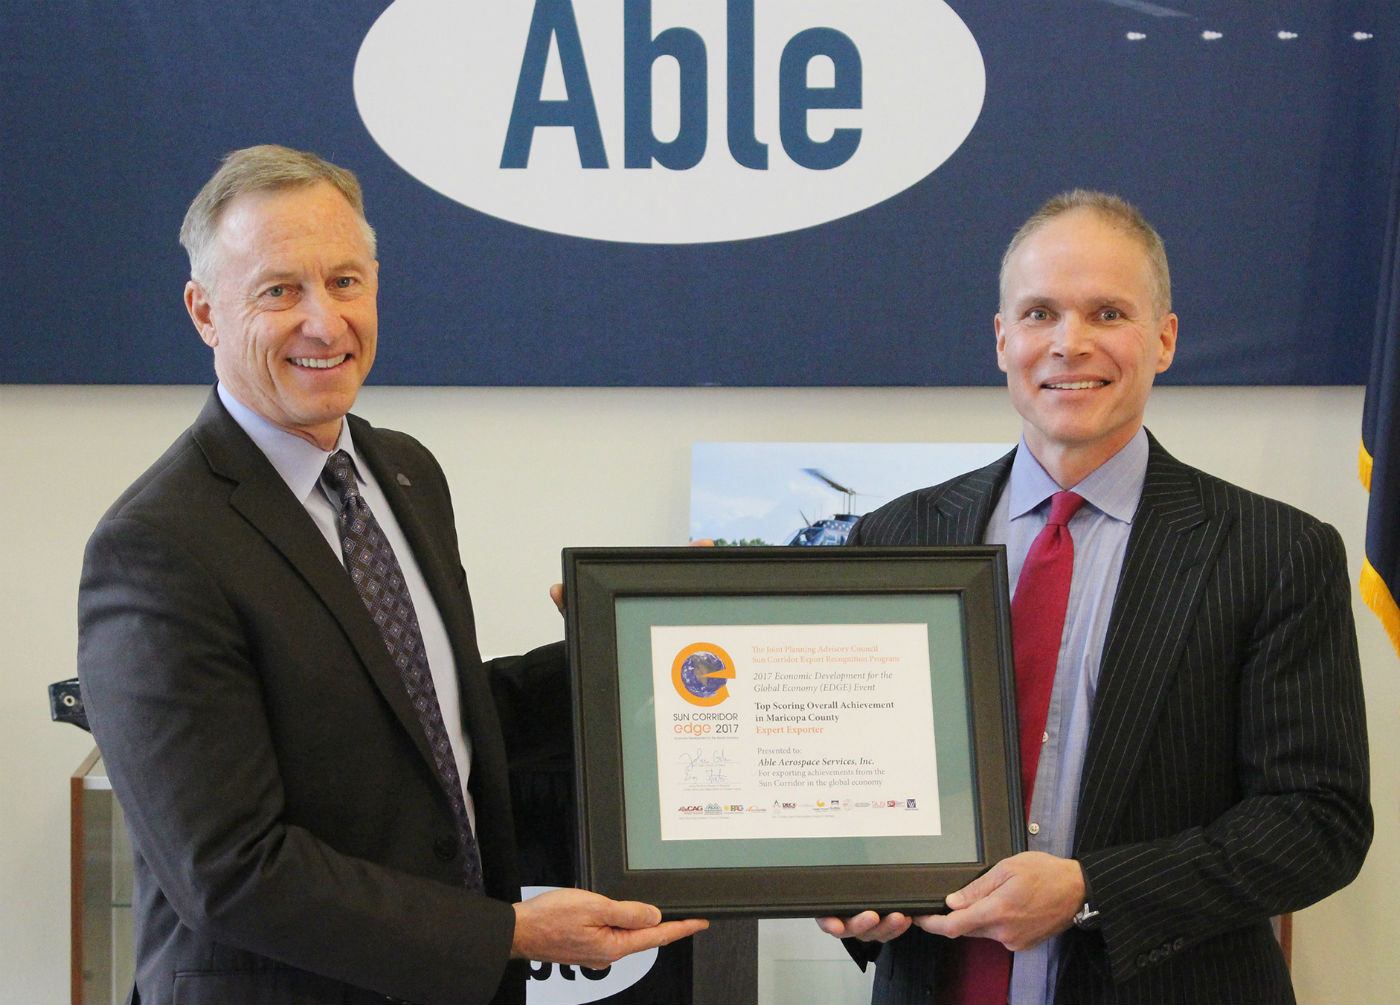 City of Mesa Mayor John Giles honored Able during a certificate presentation, held at Able’s 200,000-square-foot headquarters at the Phoenix Mesa Gateway Airport in Mesa, Arizona. Able Photo